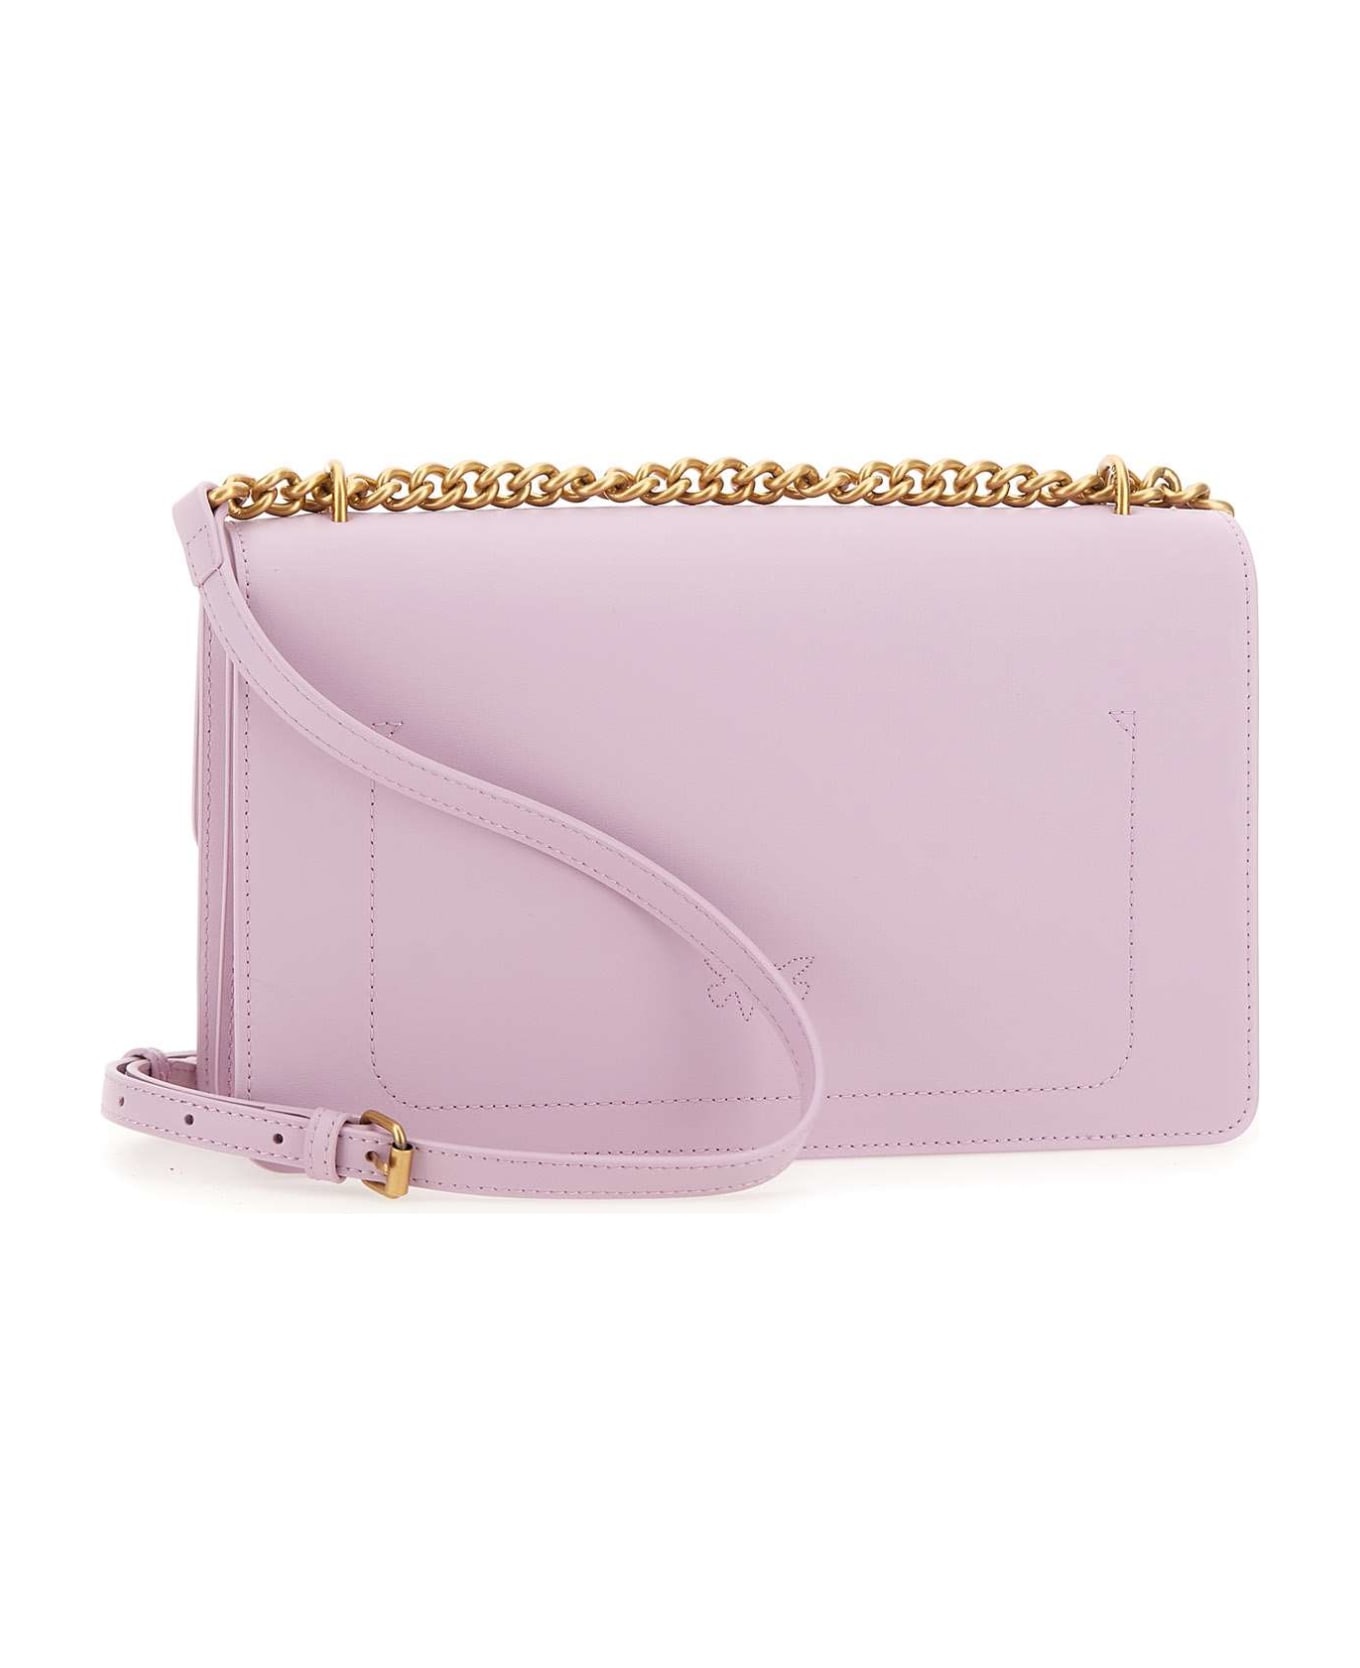 Pinko "love One Classic" Leather Bag - LILAC